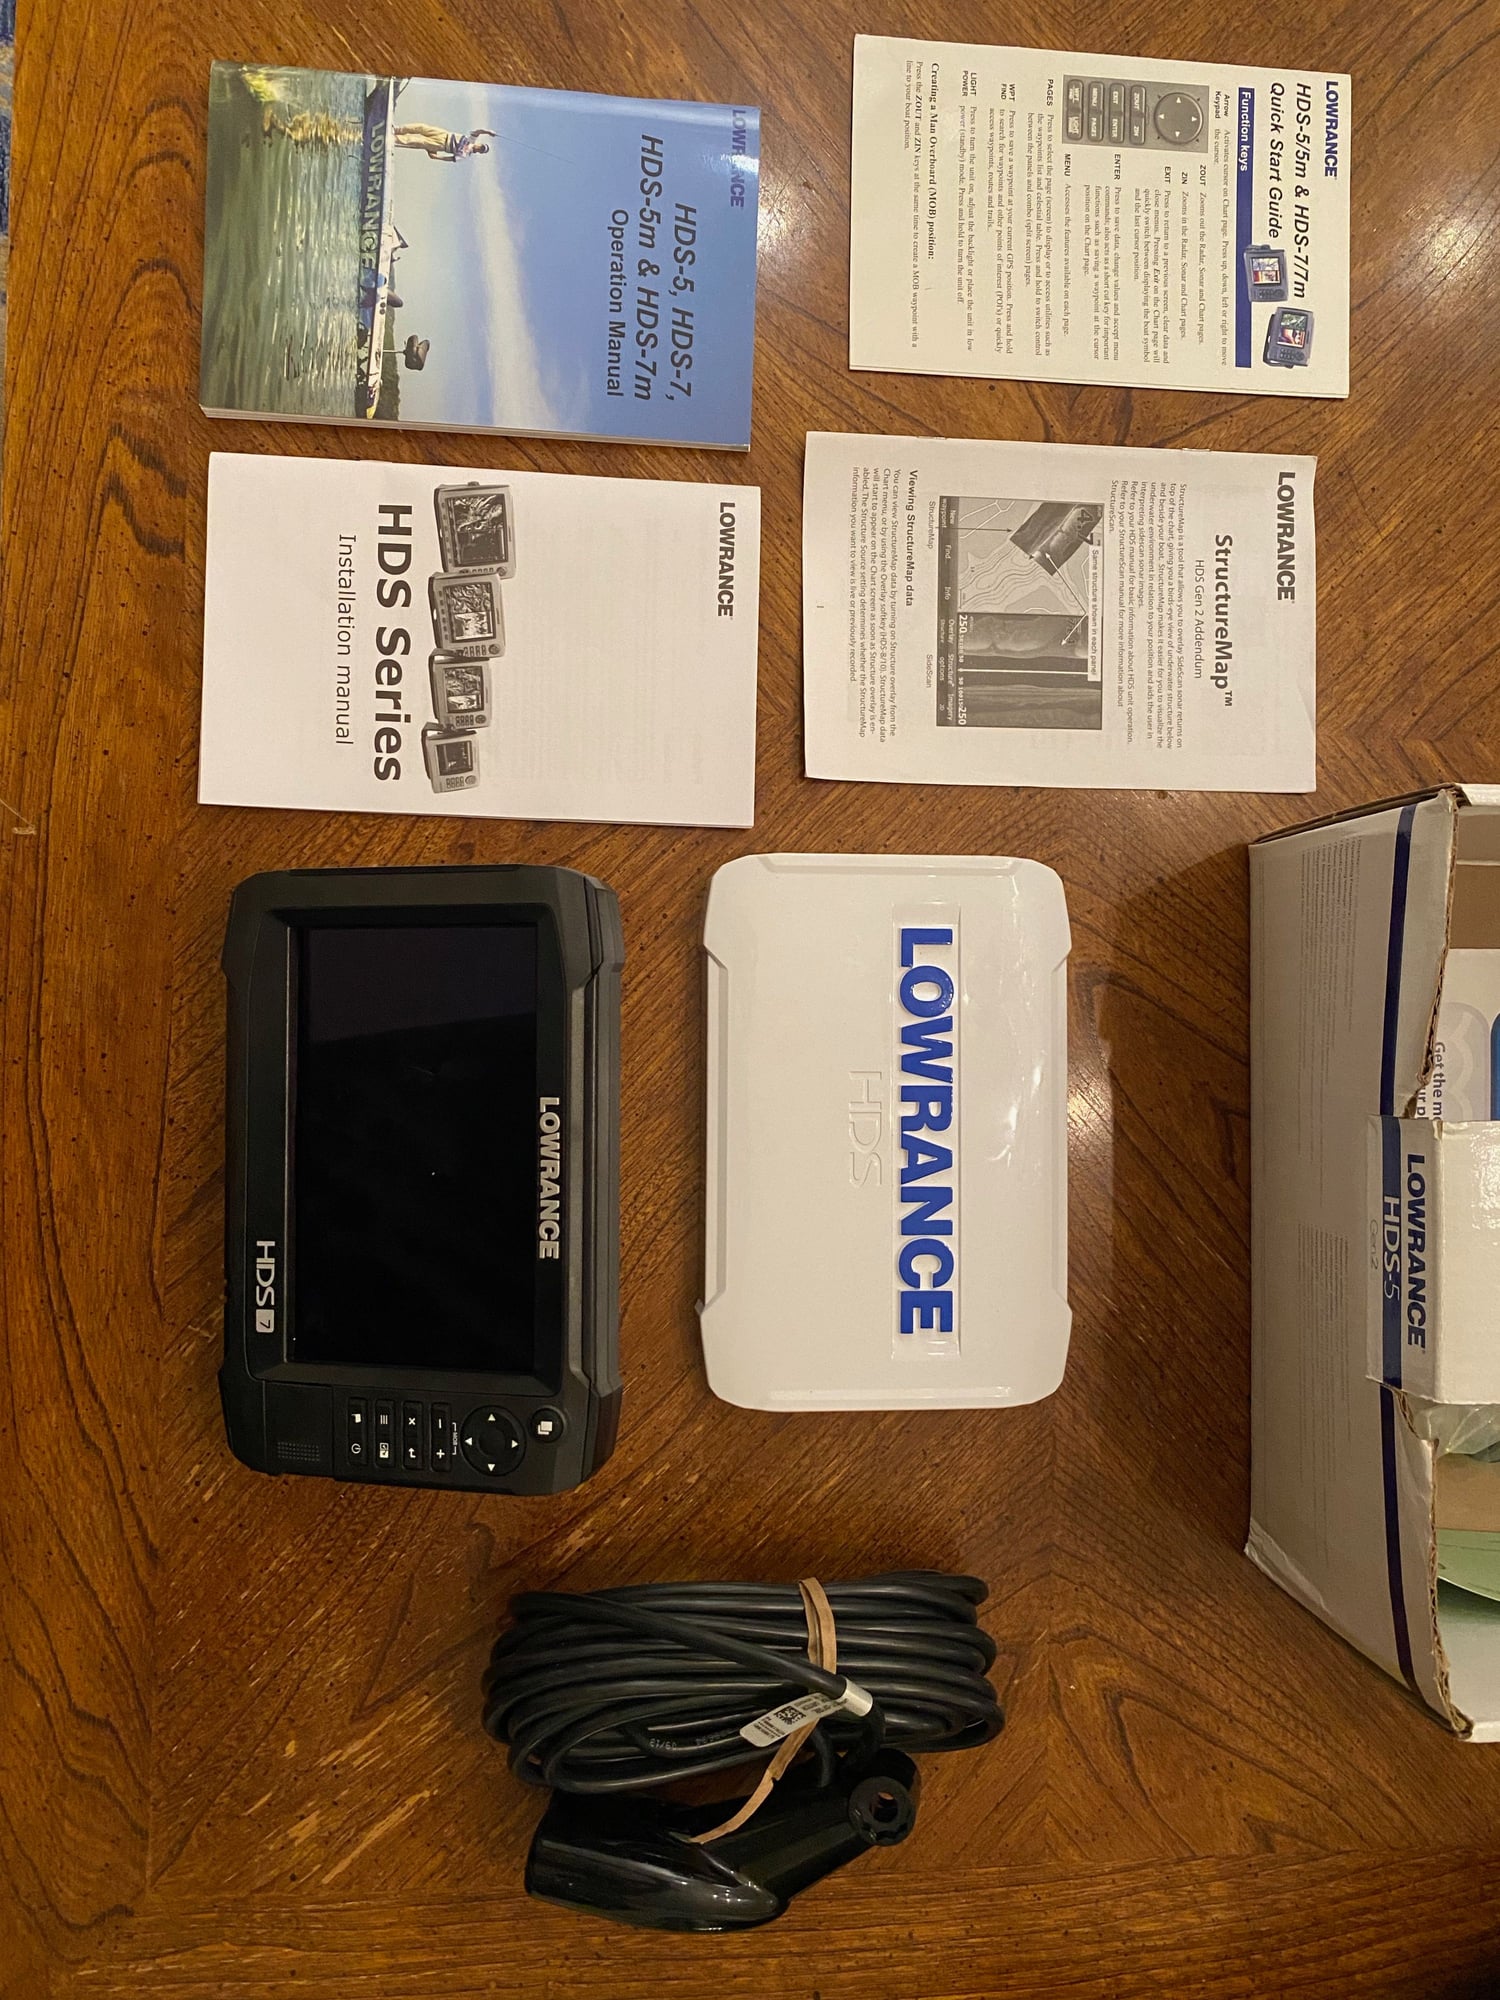 Lowrance HDS 7 Gen 3 Unit - The Hull Truth - Boating and Fishing Forum